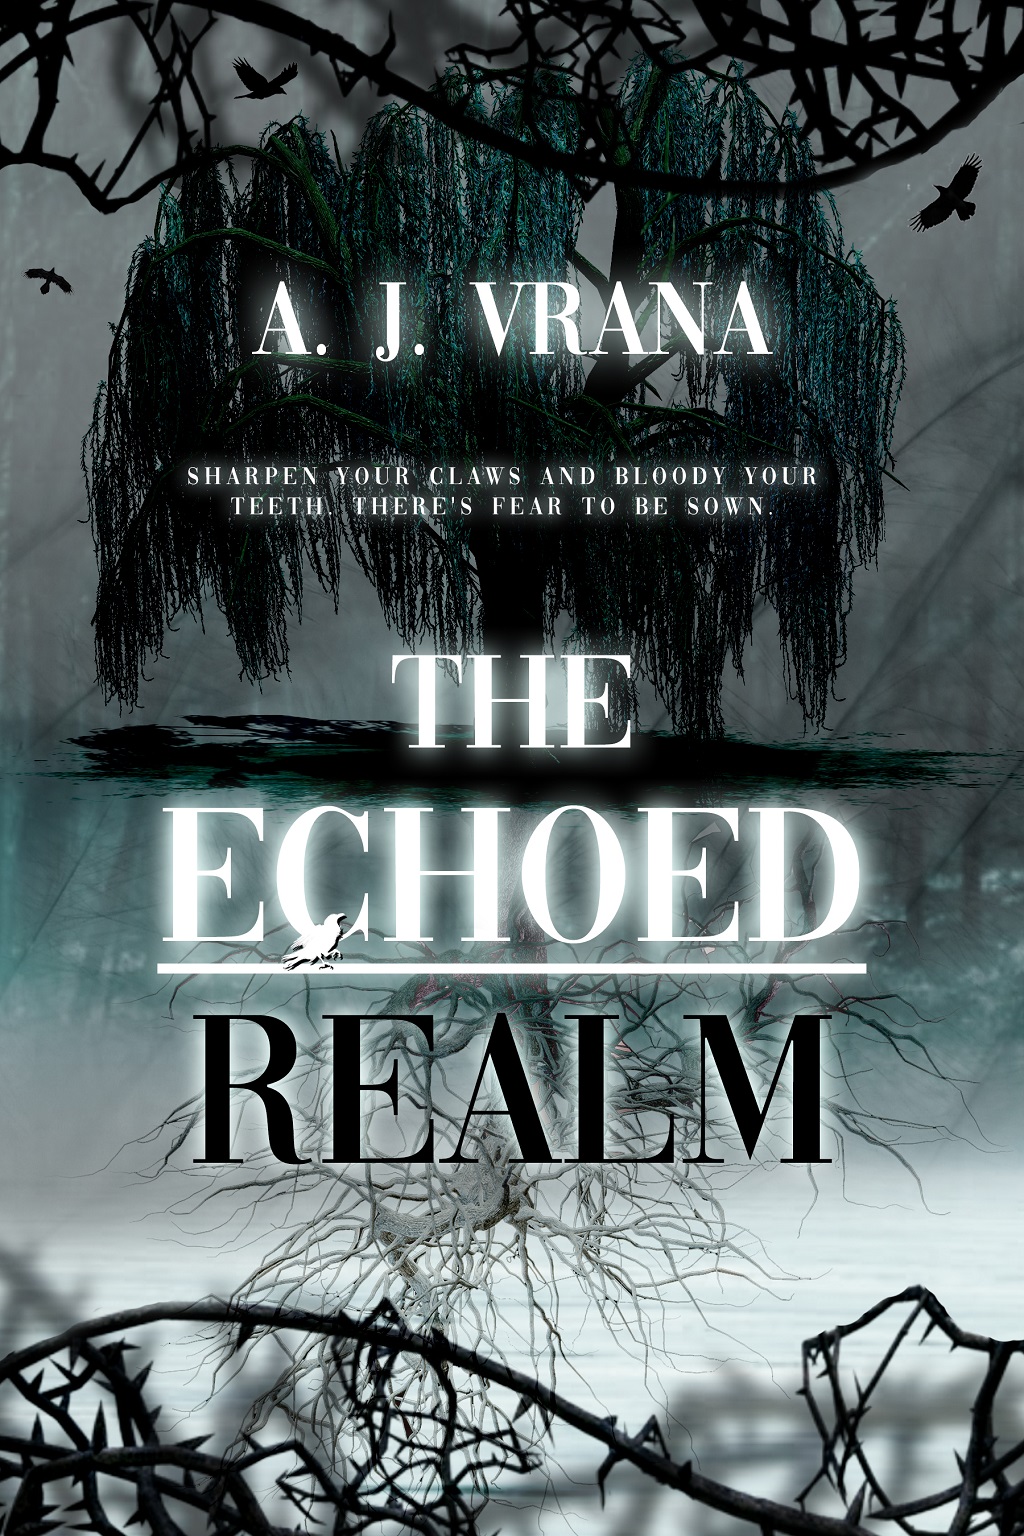 The Echoed Realm by A. J. Vrana